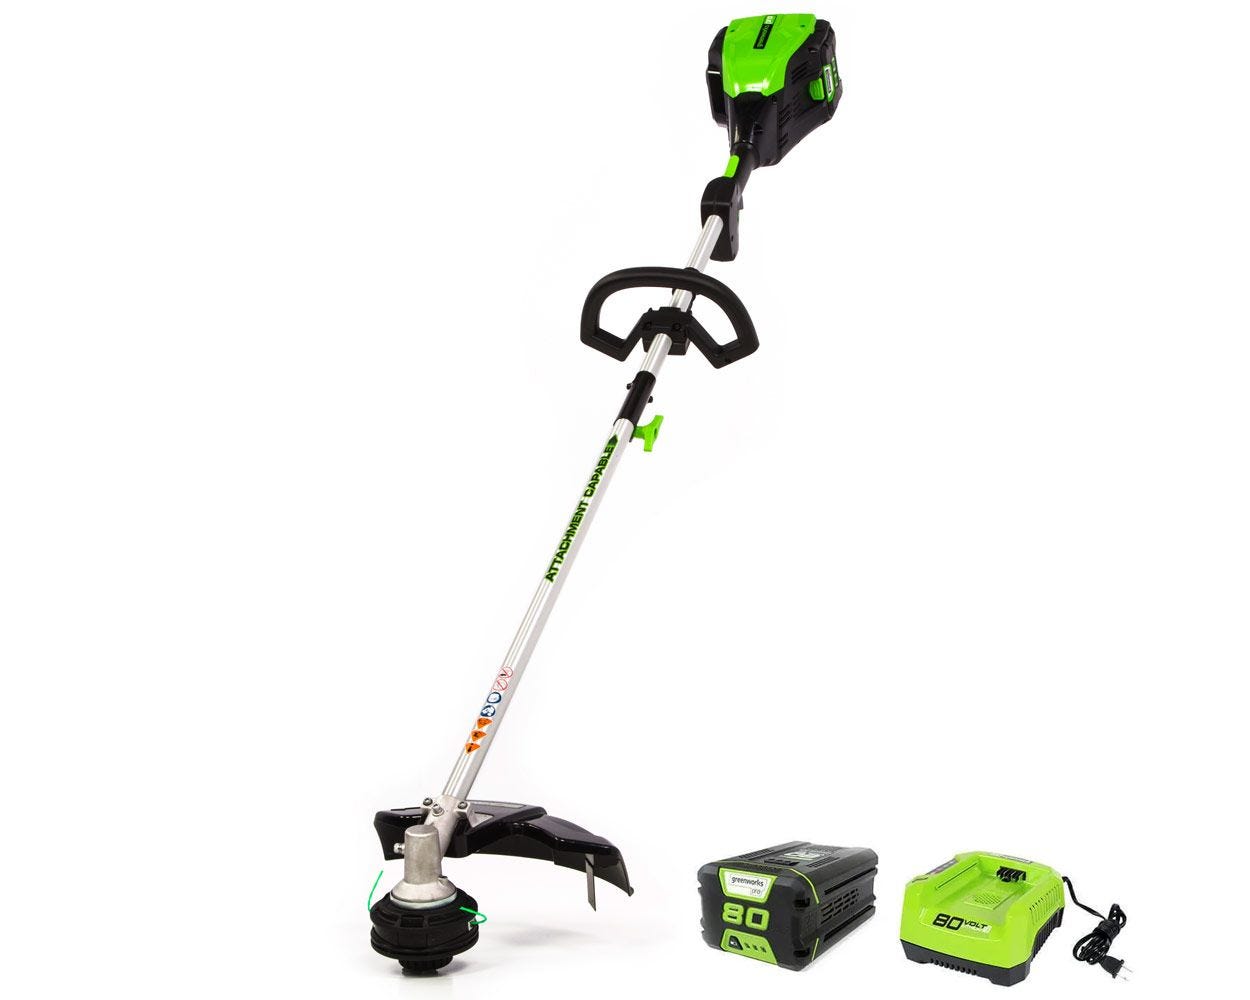 80V 16" Cordless Battery String Trimmer (Attachment Capable) & Horizontal Blower Attachment Combo Kit w/ 2.0Ah Battery & Charger